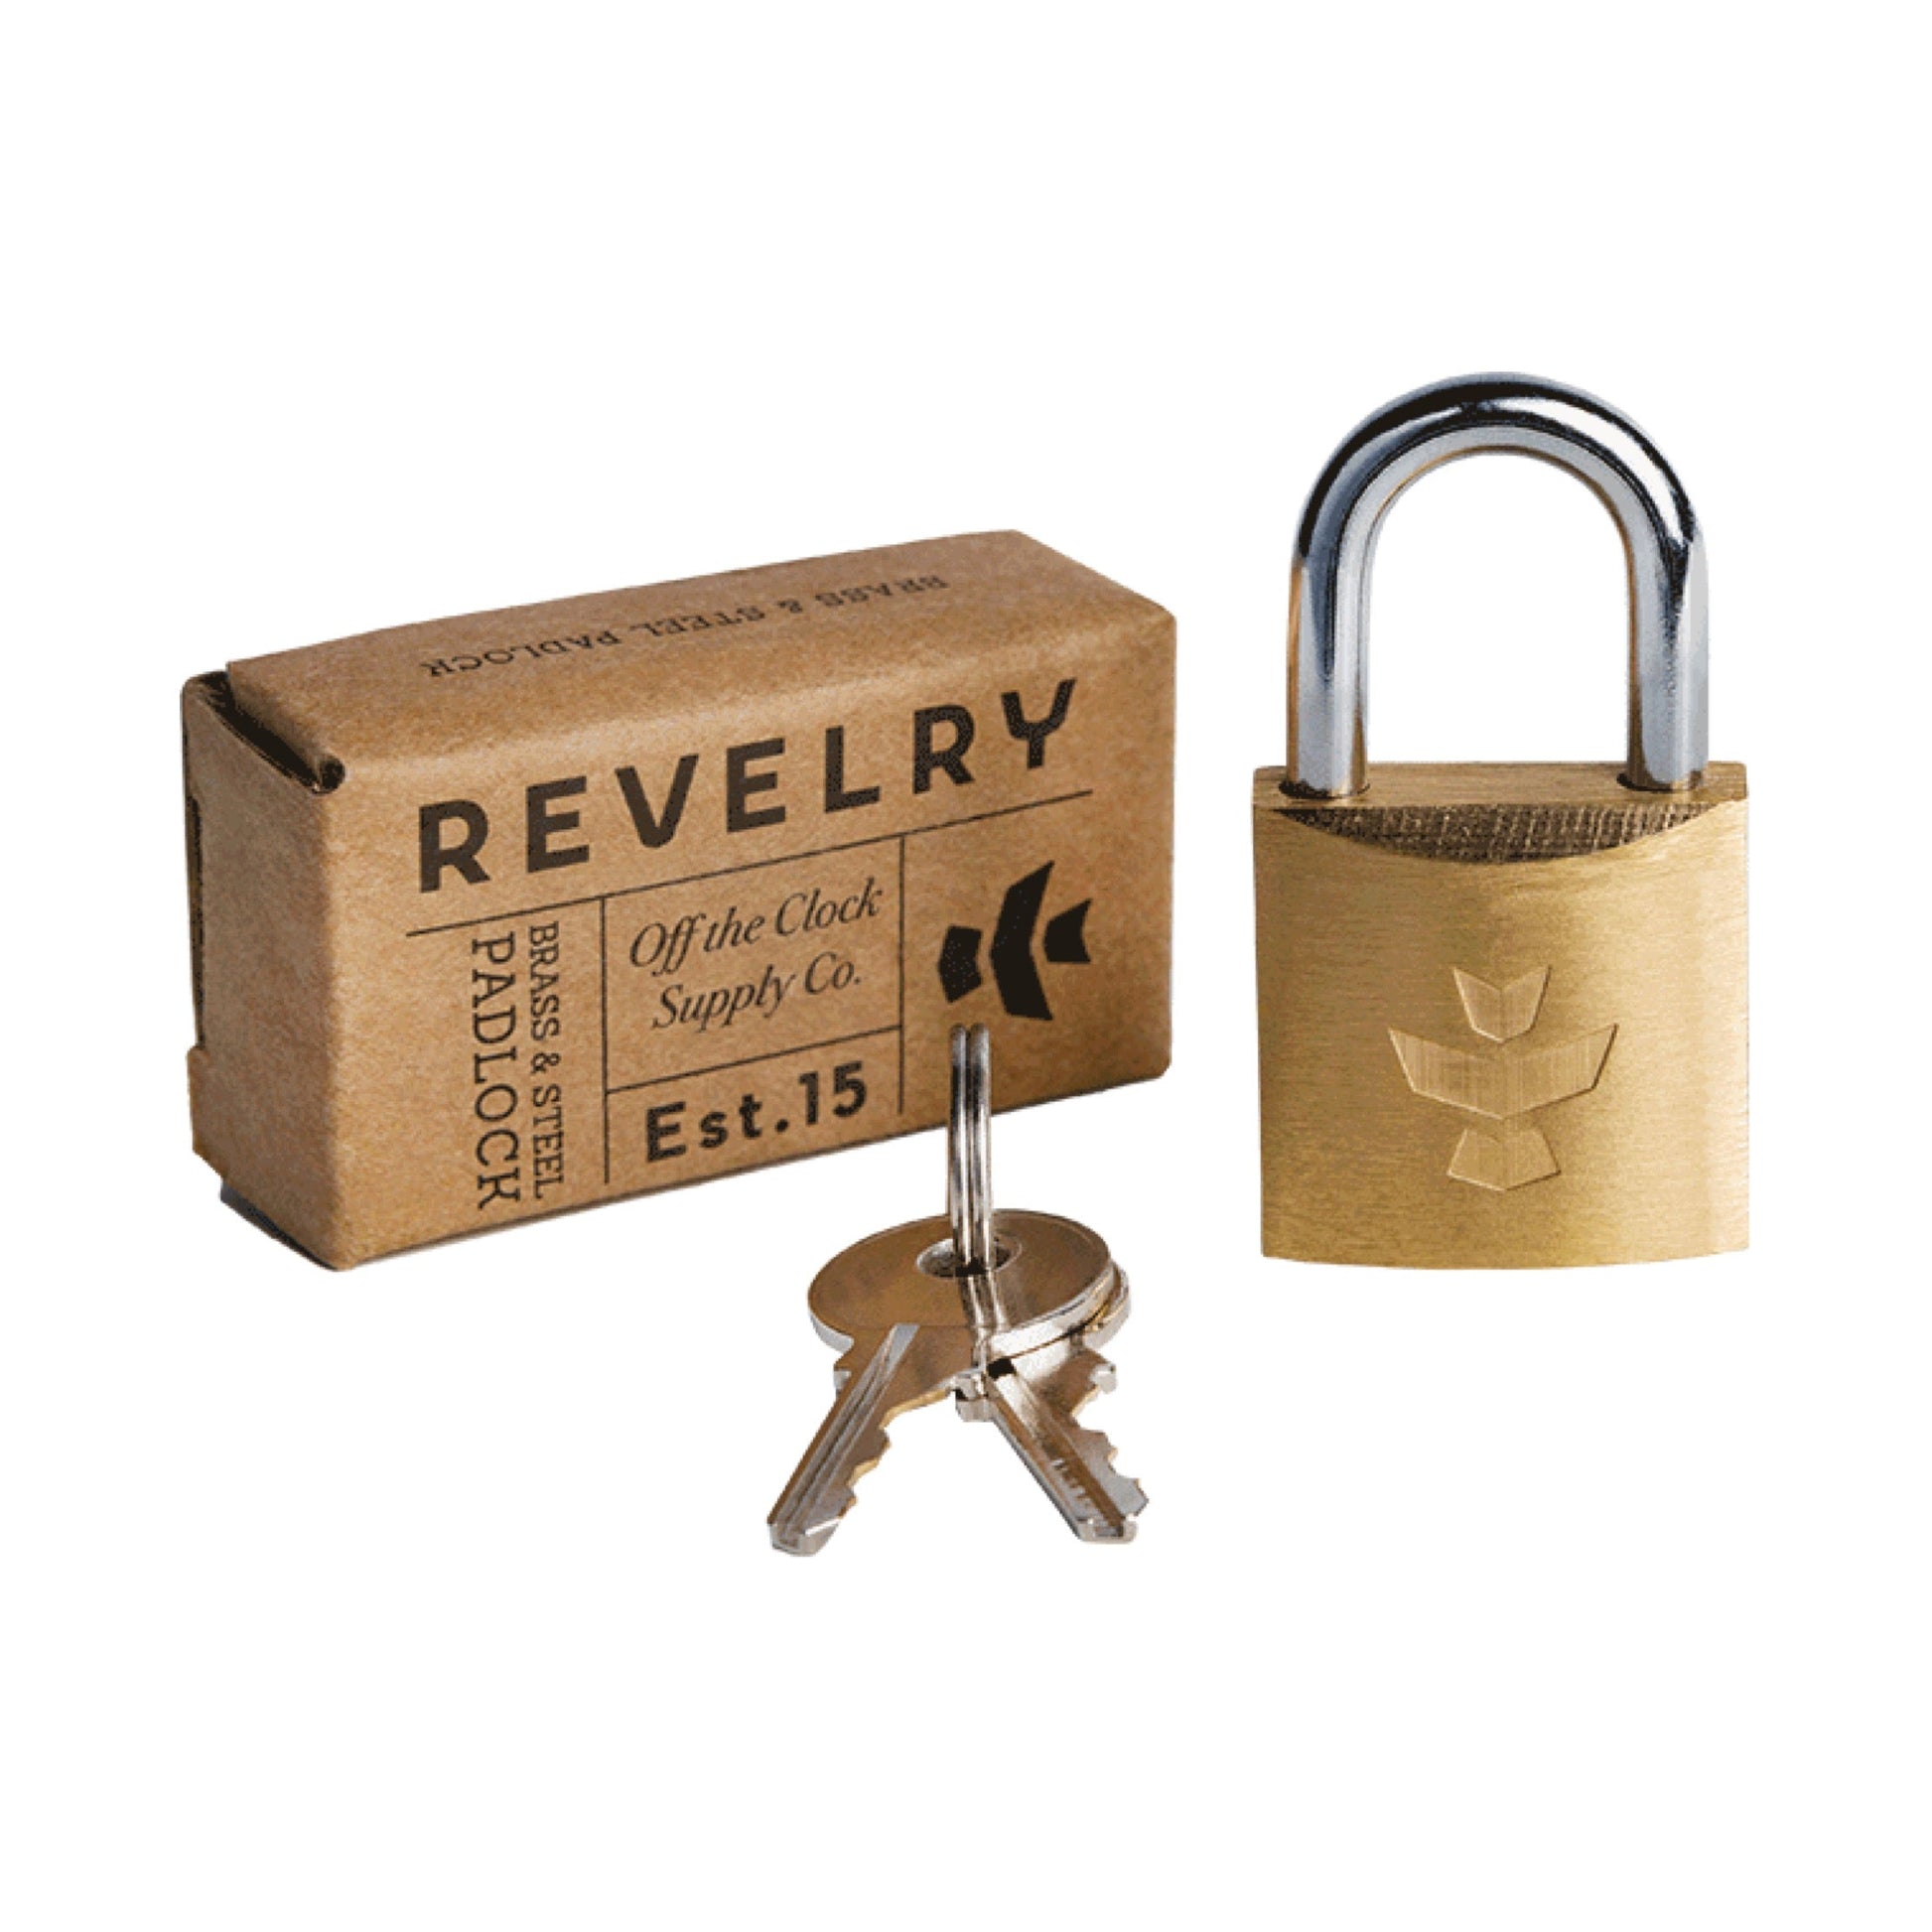 Revelry Luggage Lock by Revelry Supply | Mission Dispensary